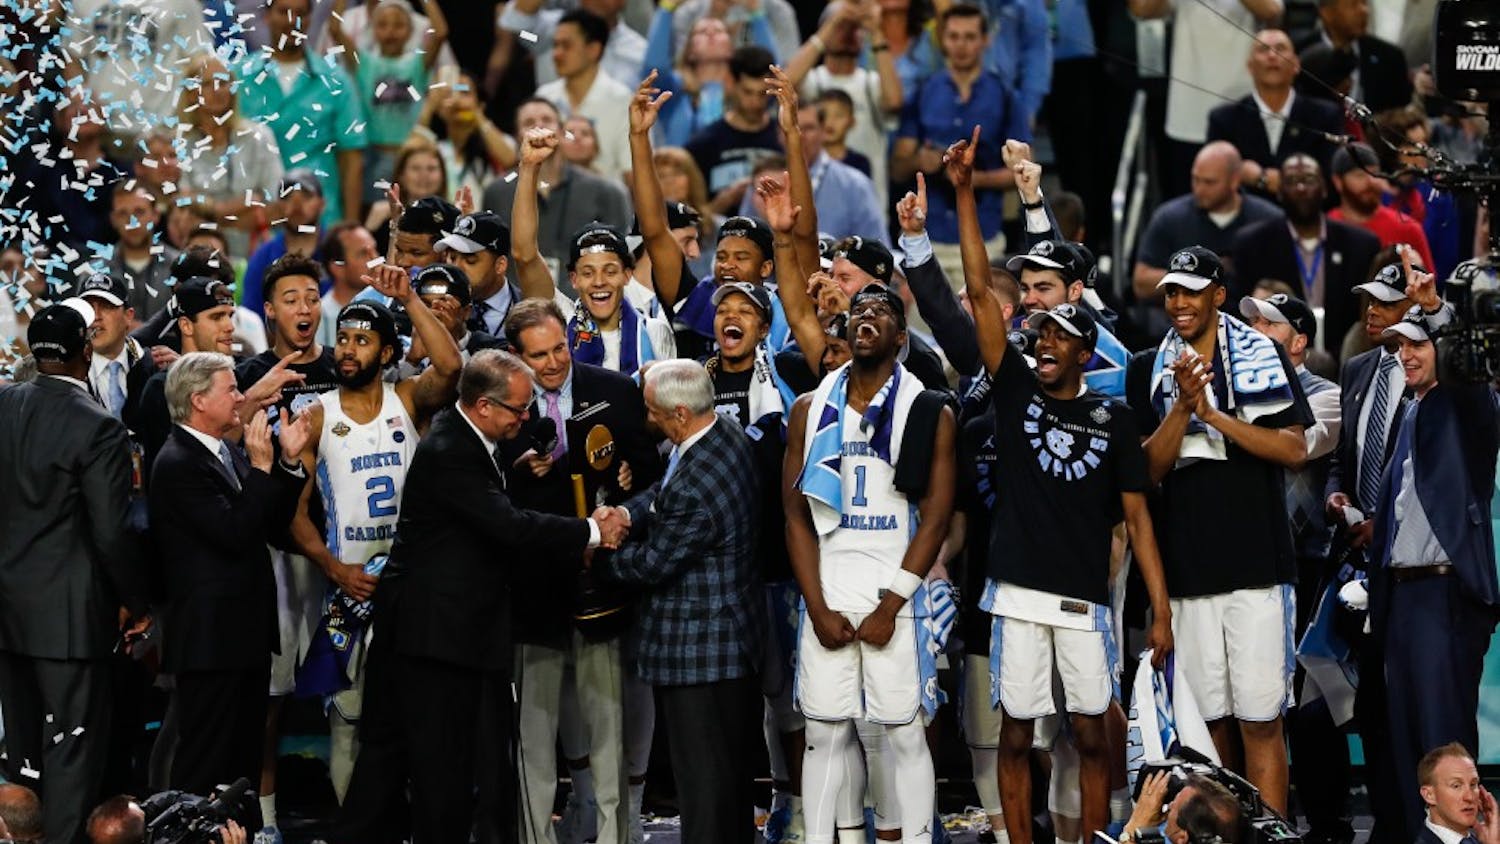 The North Carolina mens basketball team recieves the NCAA Final trophy after their win over Gonzaga in Phoenix on Monday.